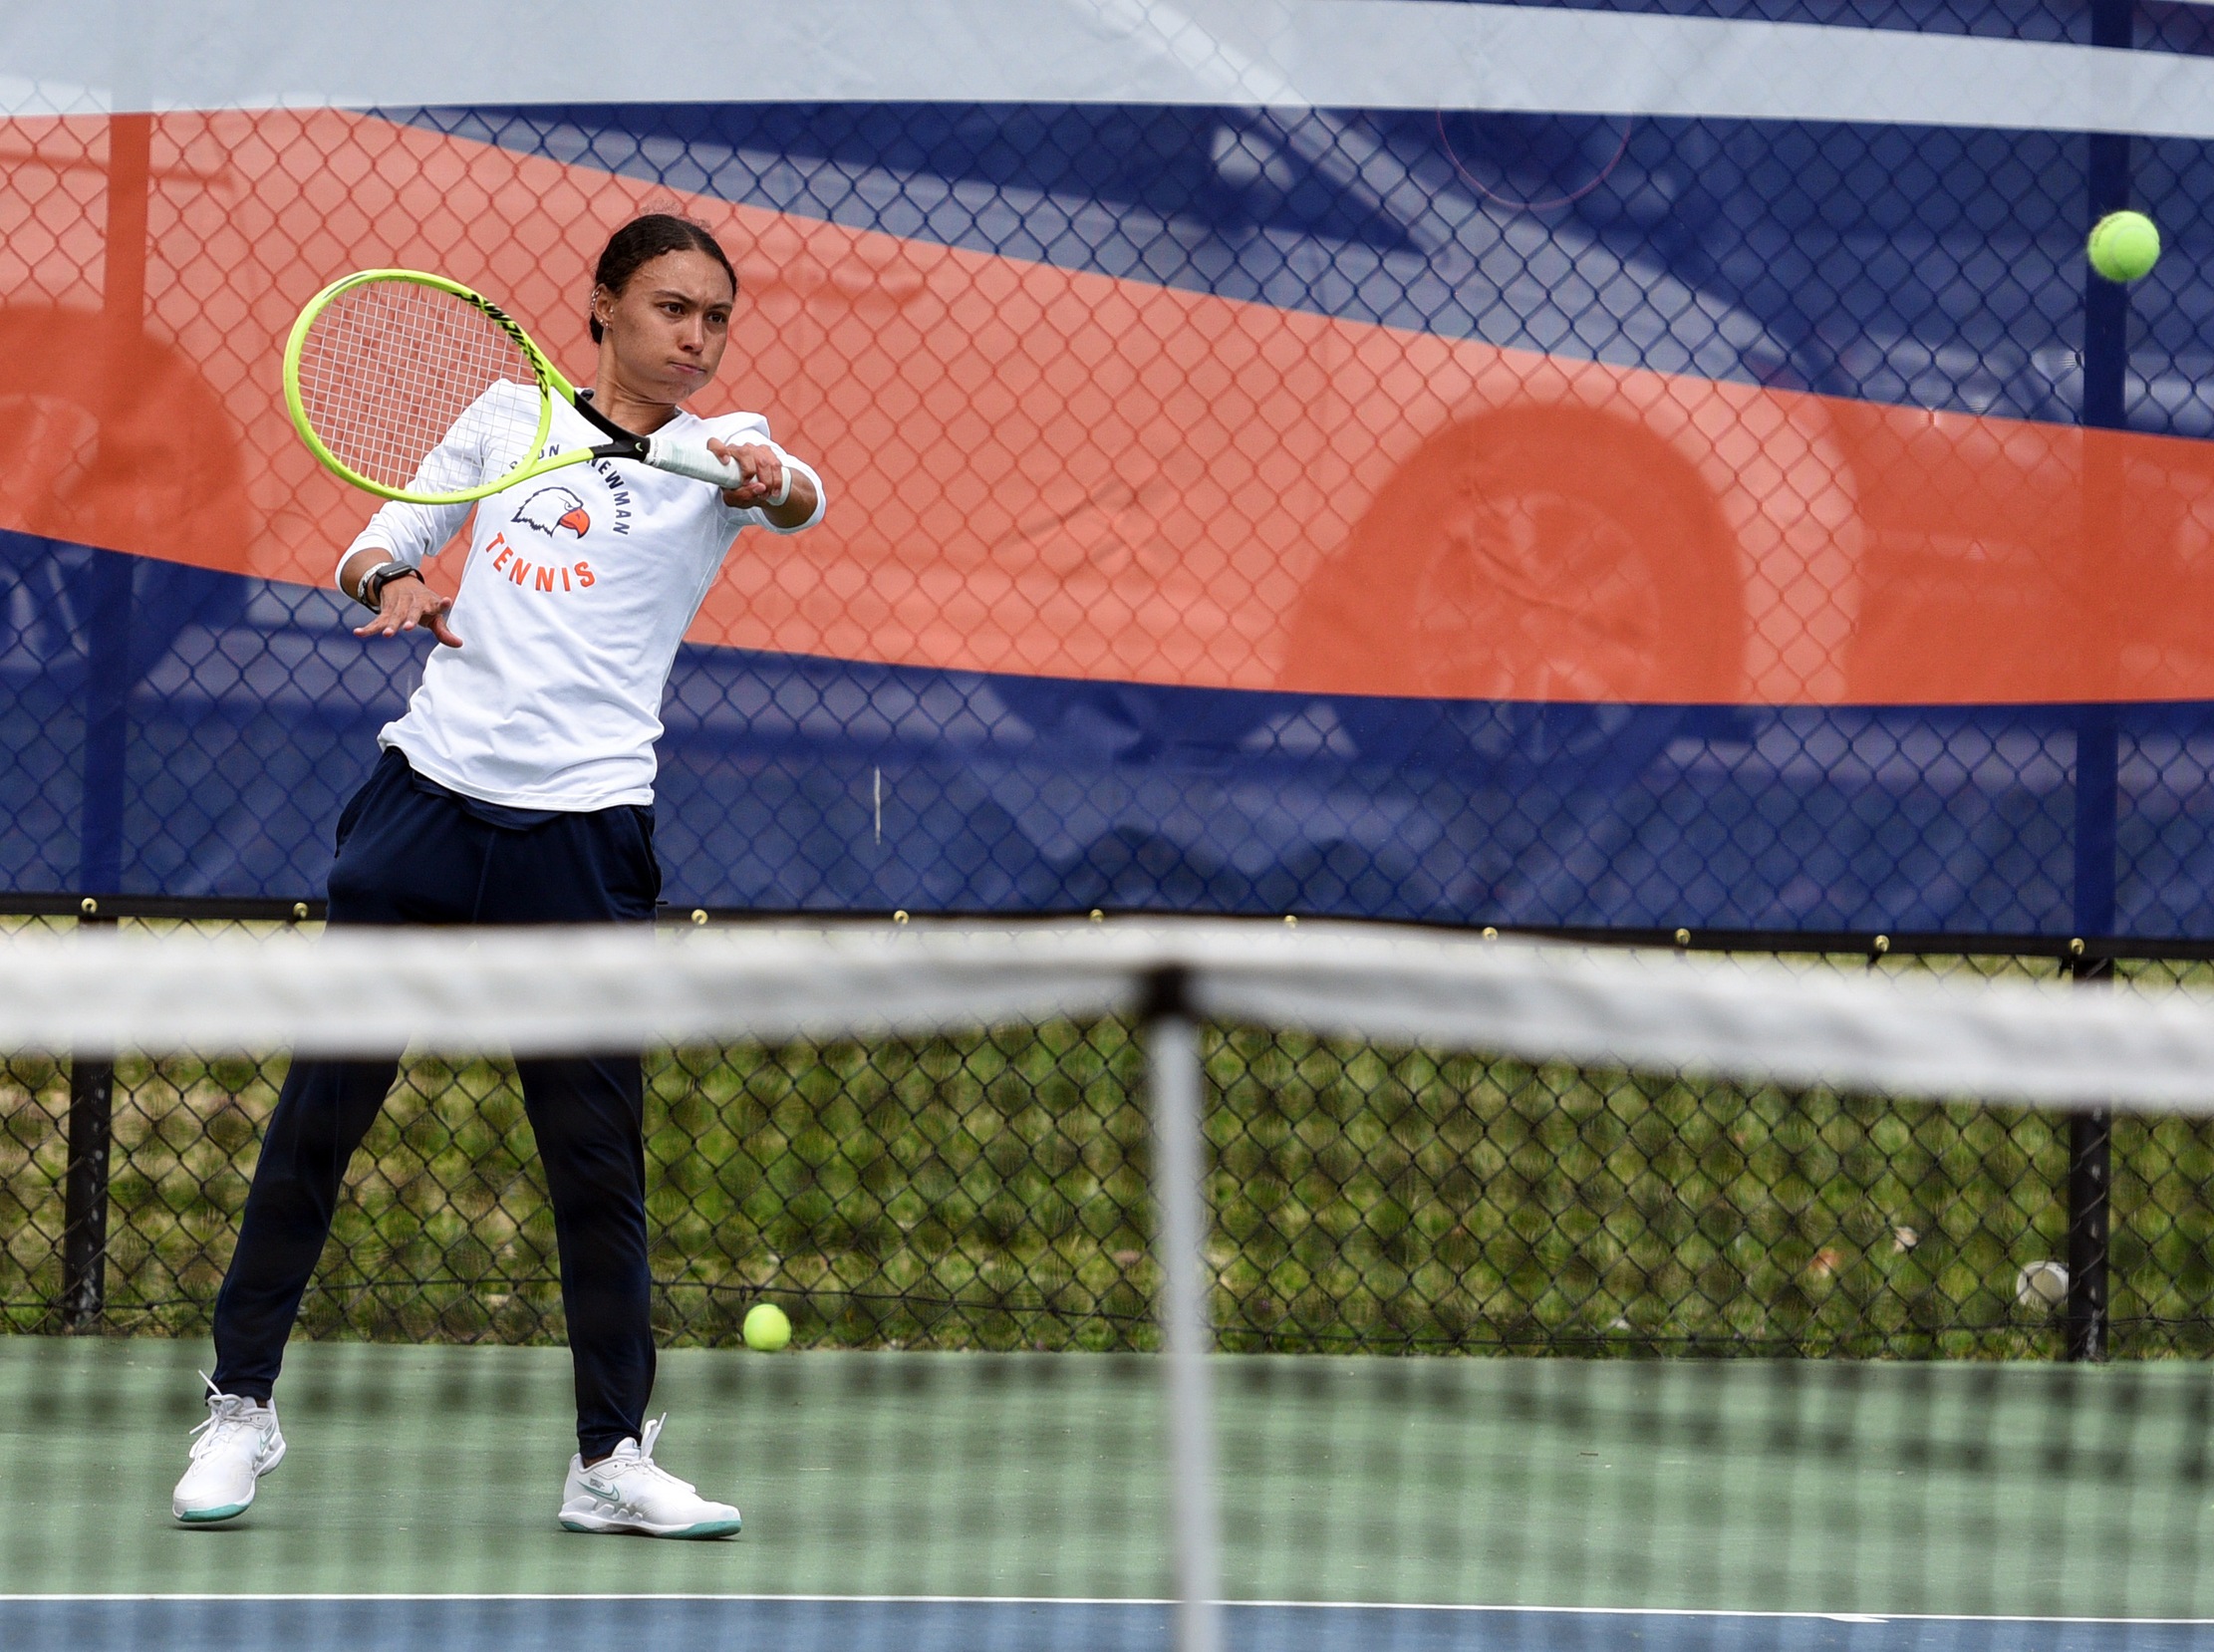 Resende and Forrest Stay Alive in Day Two of the ITA Regionals